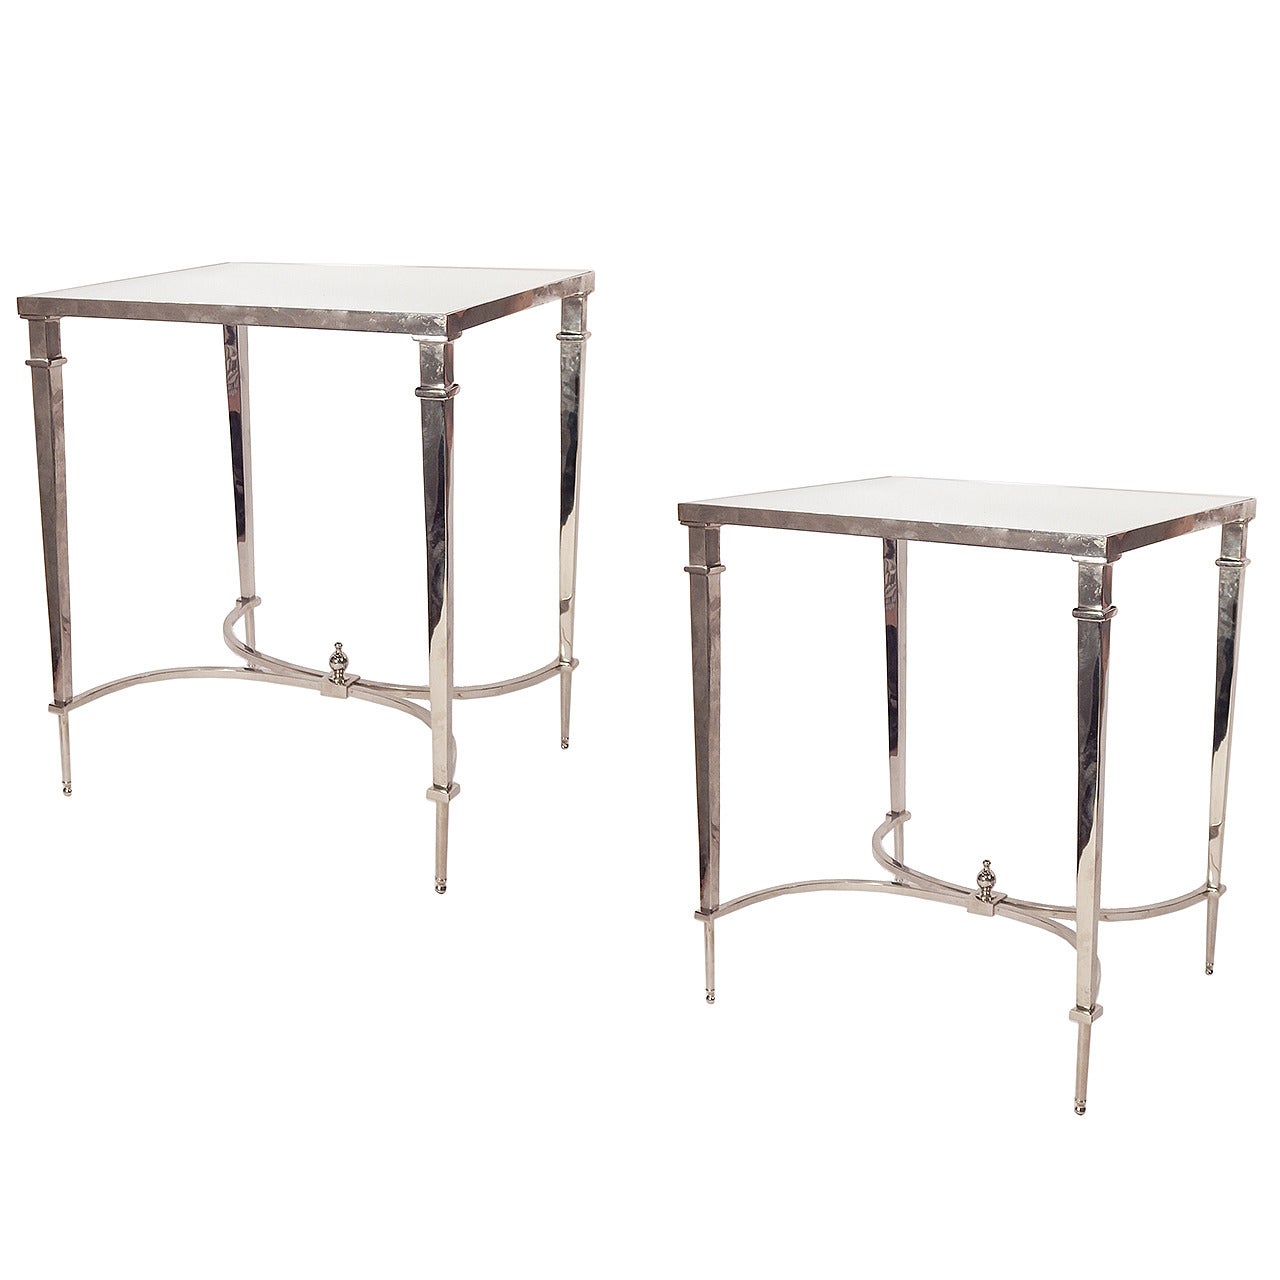 Pair of Mirrored End Tables